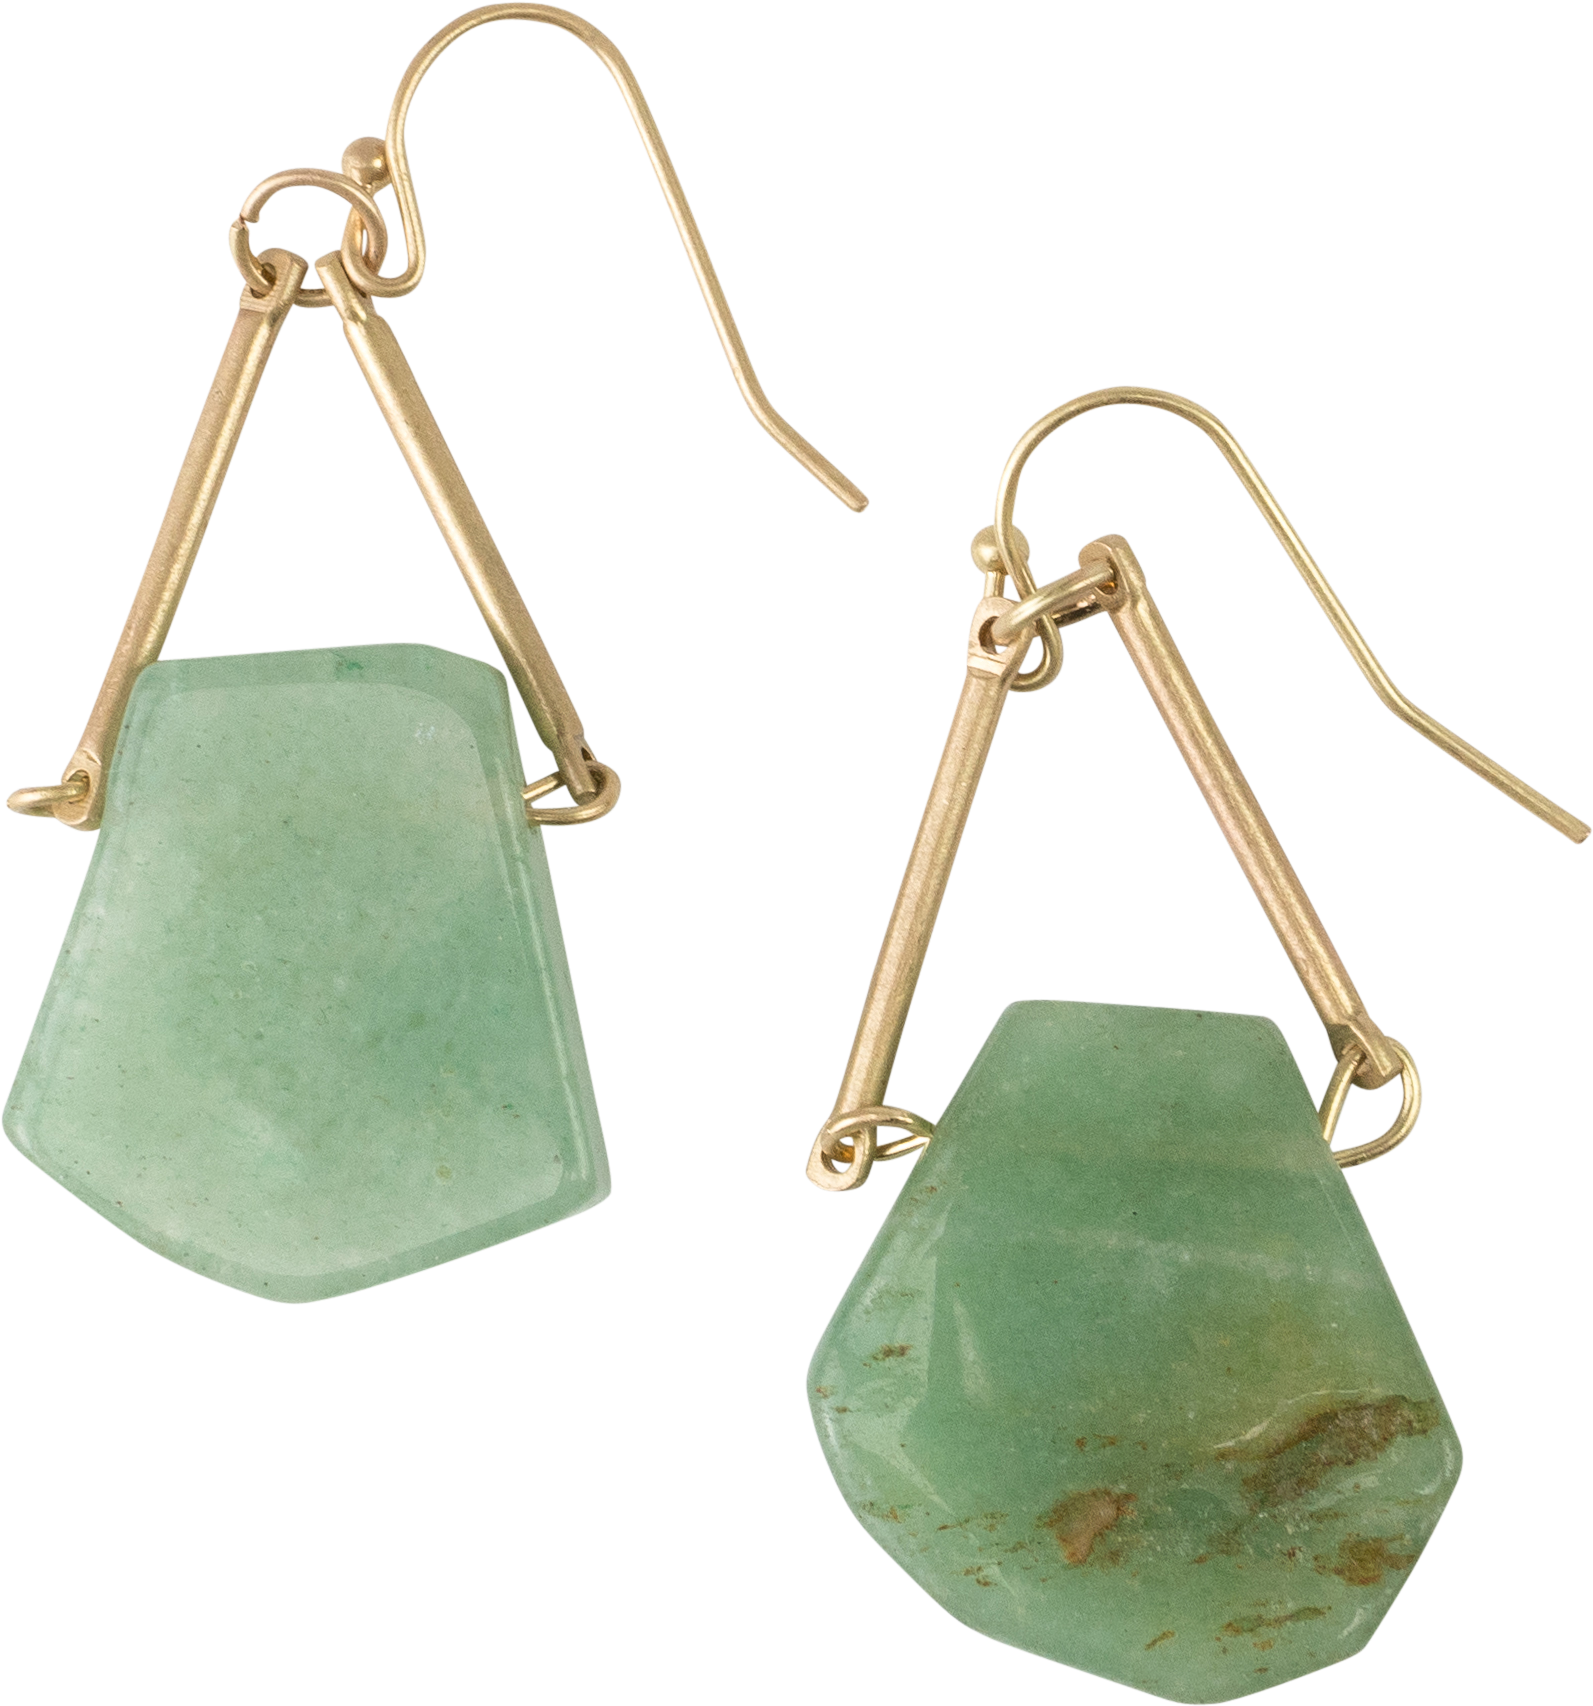 A Pair Of Earrings With Green Stone